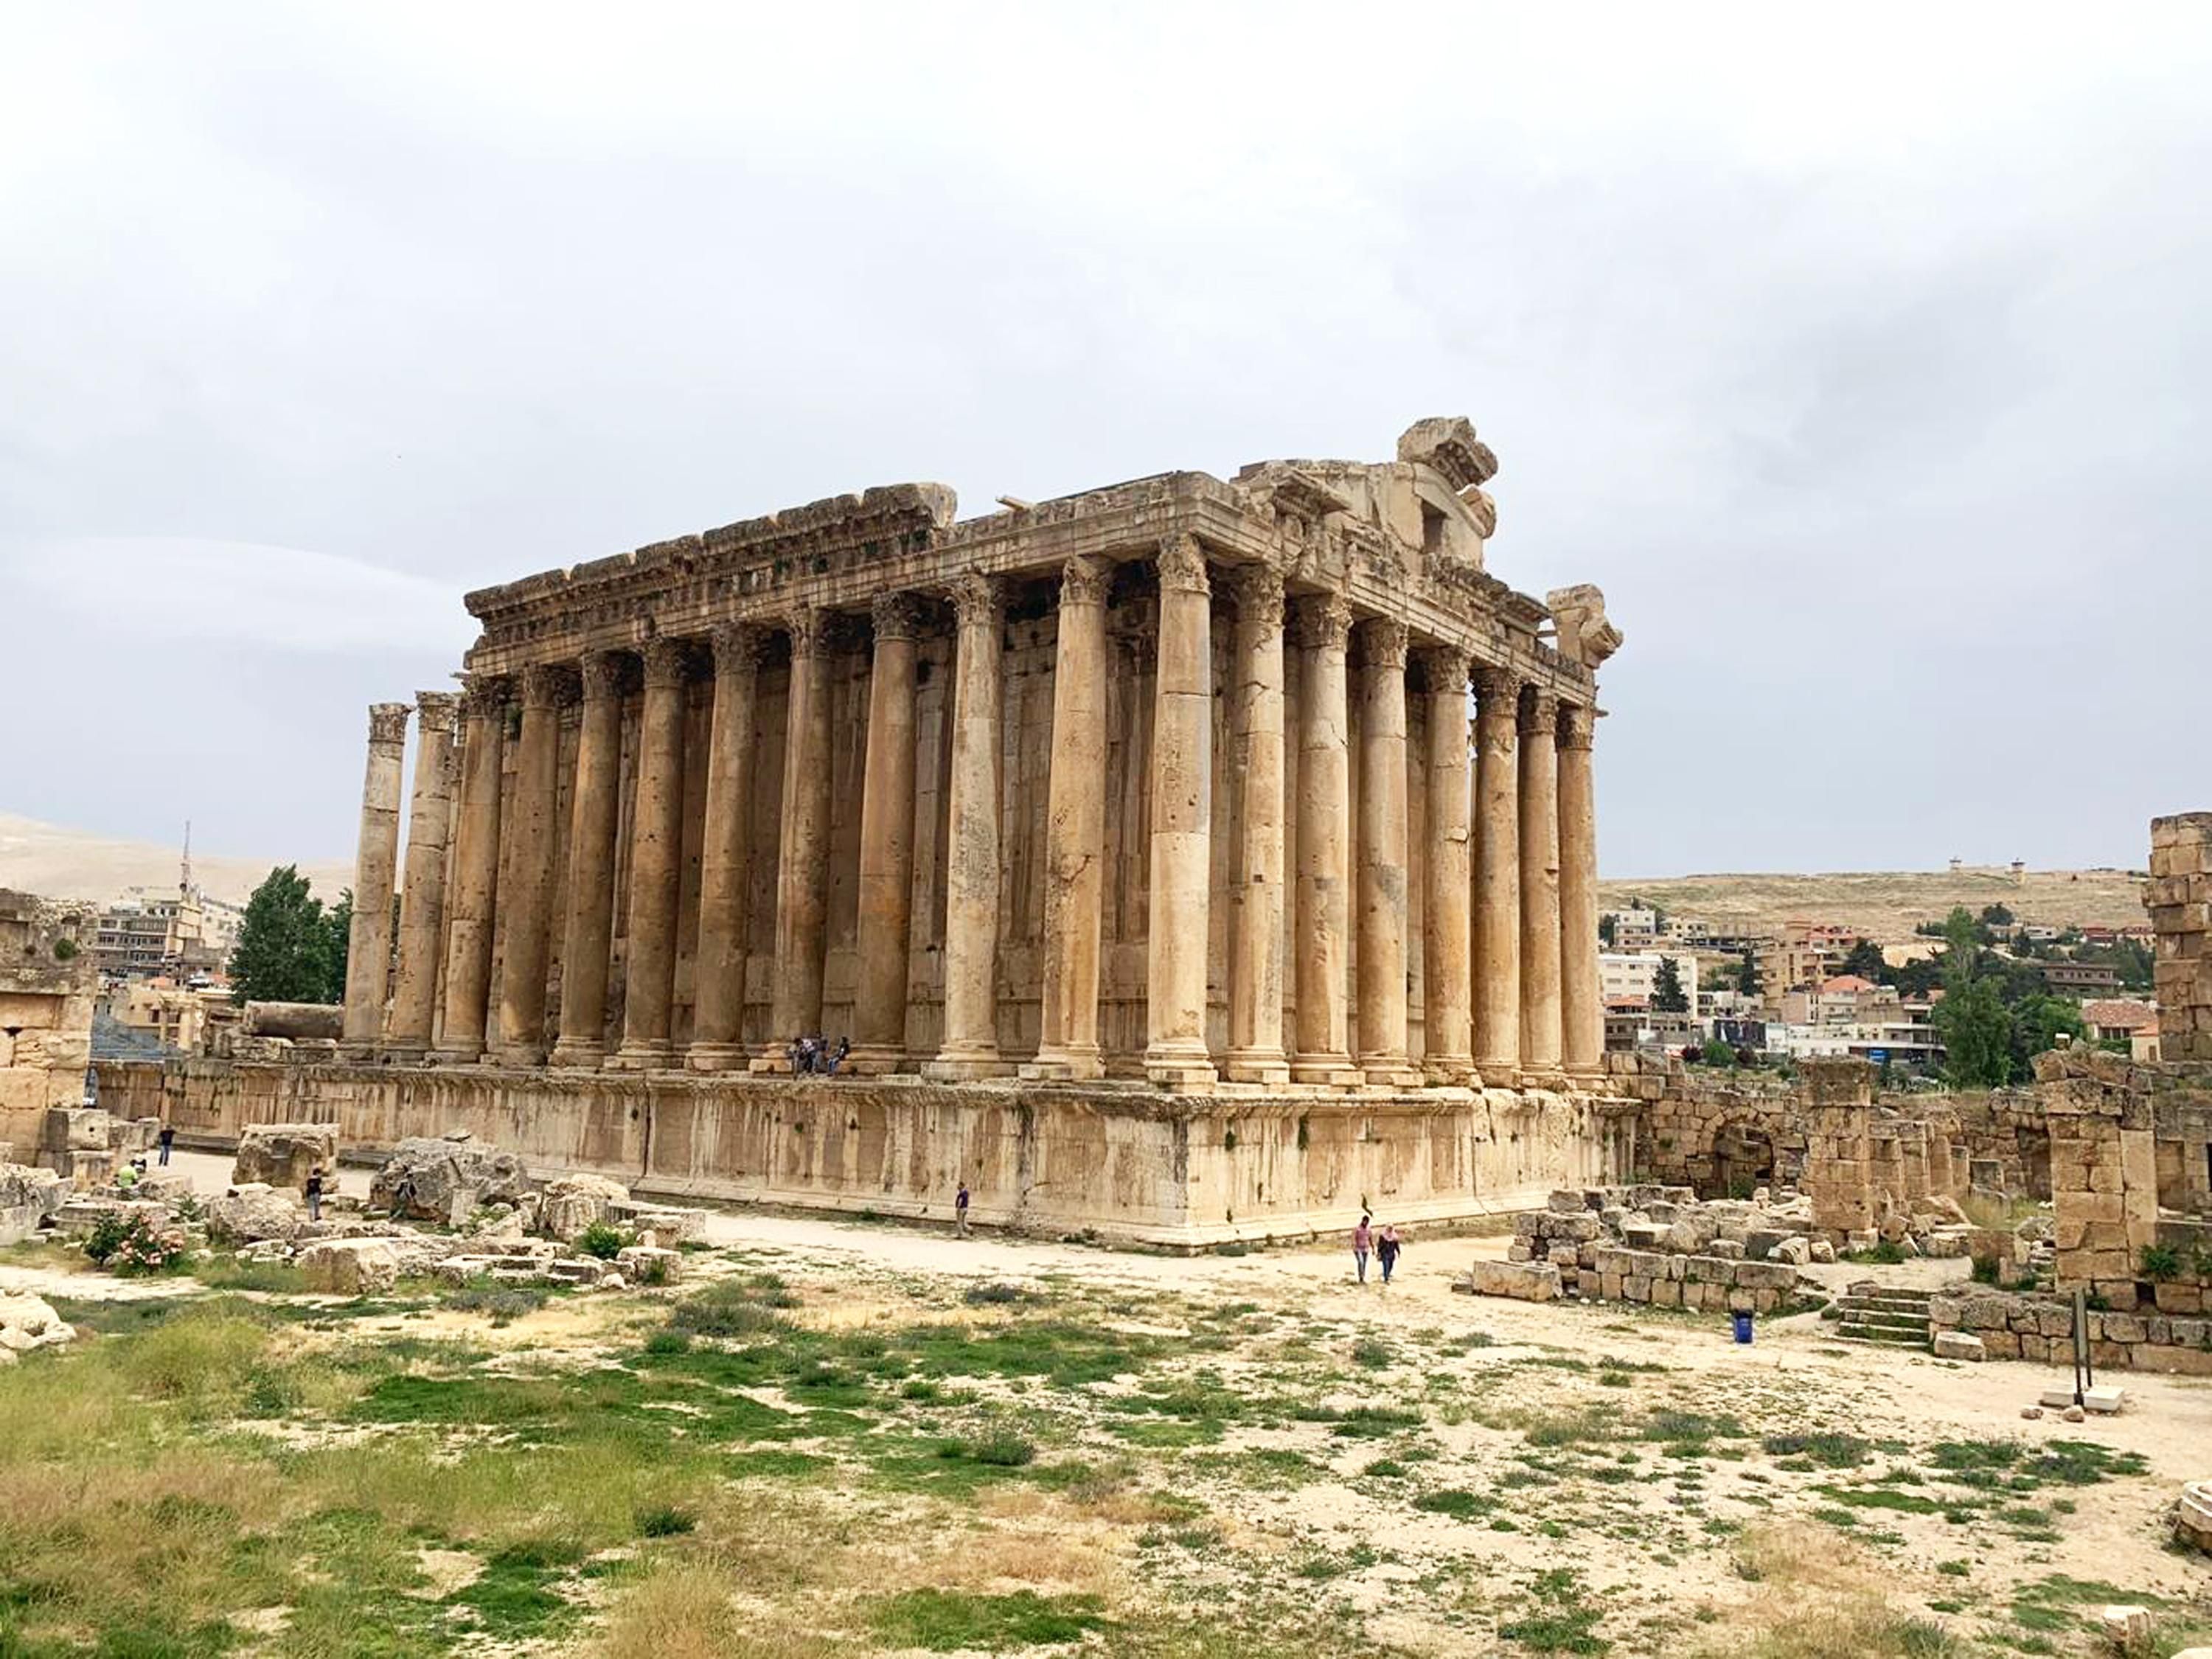 The Temple of Bacchus at Baalbeck